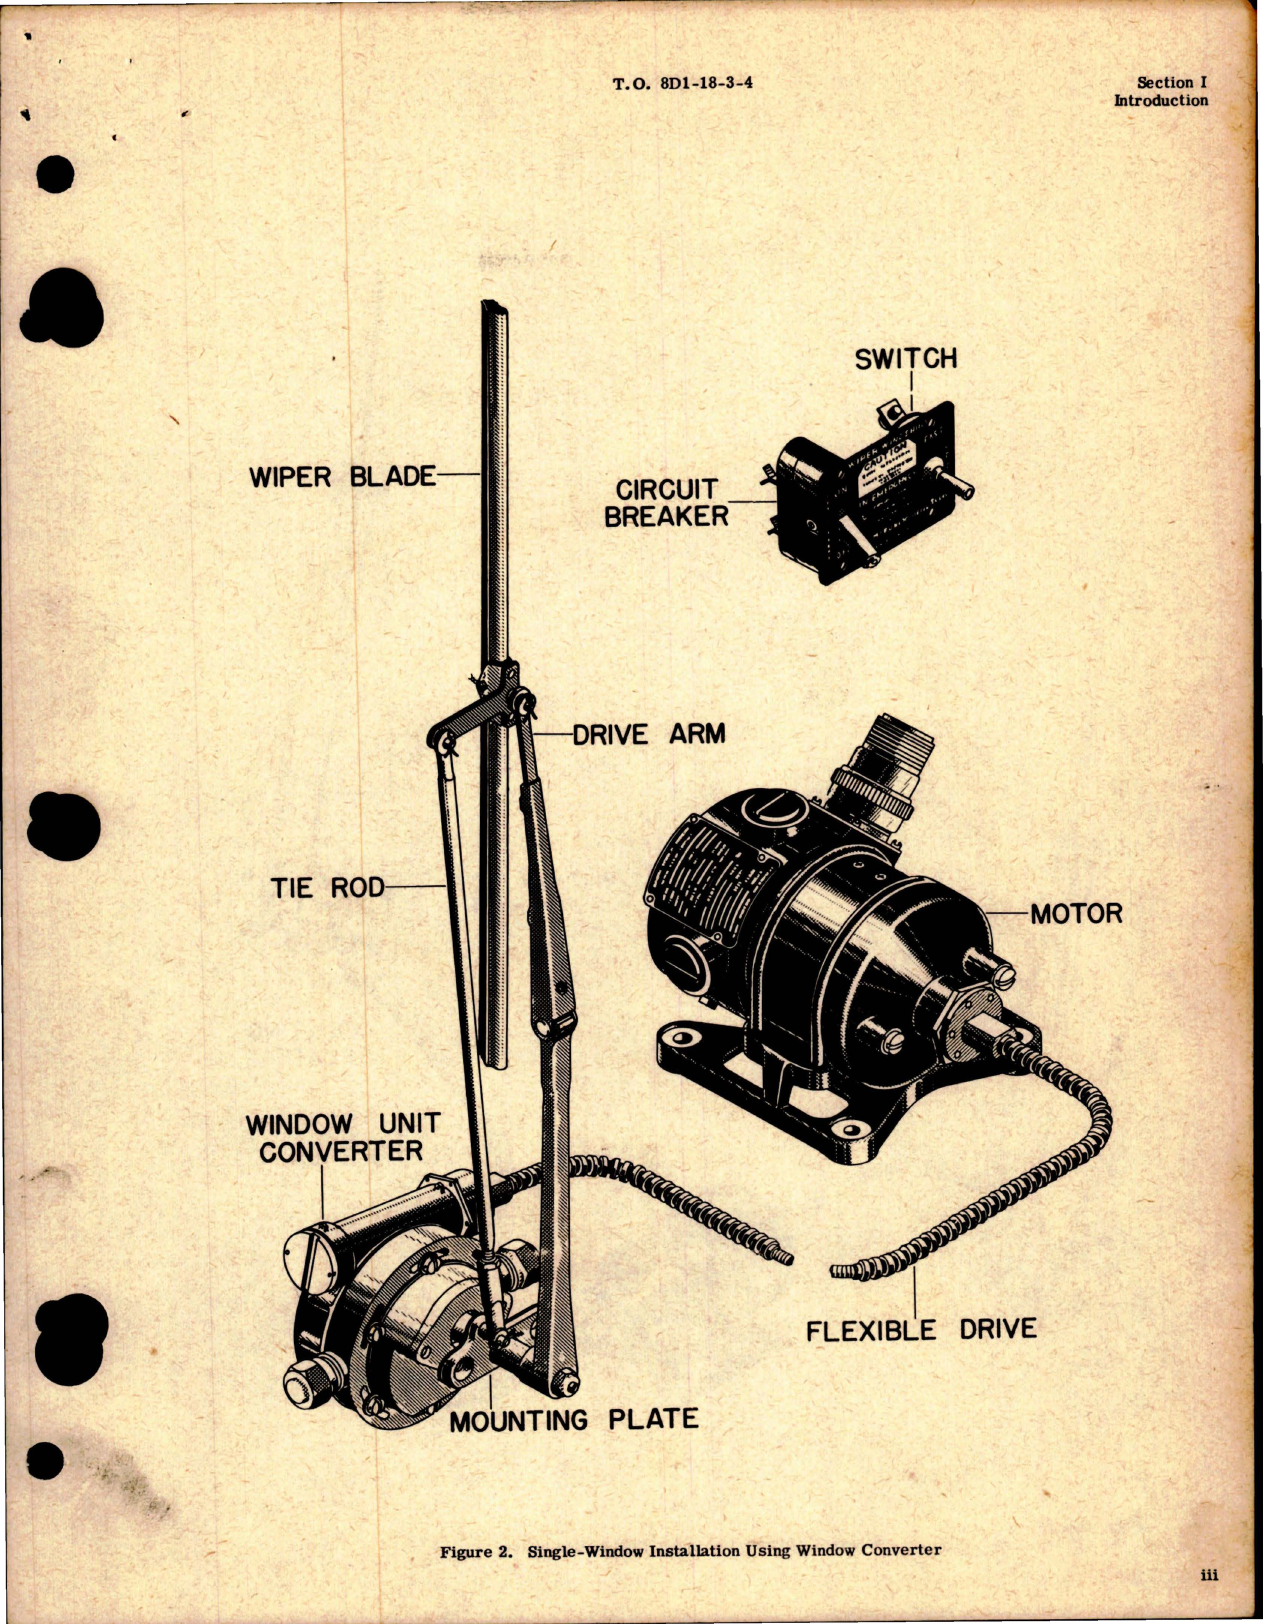 Sample page 5 from AirCorps Library document: Illustrated Parts Breakdown for Electric Windshield Wiper Assembly